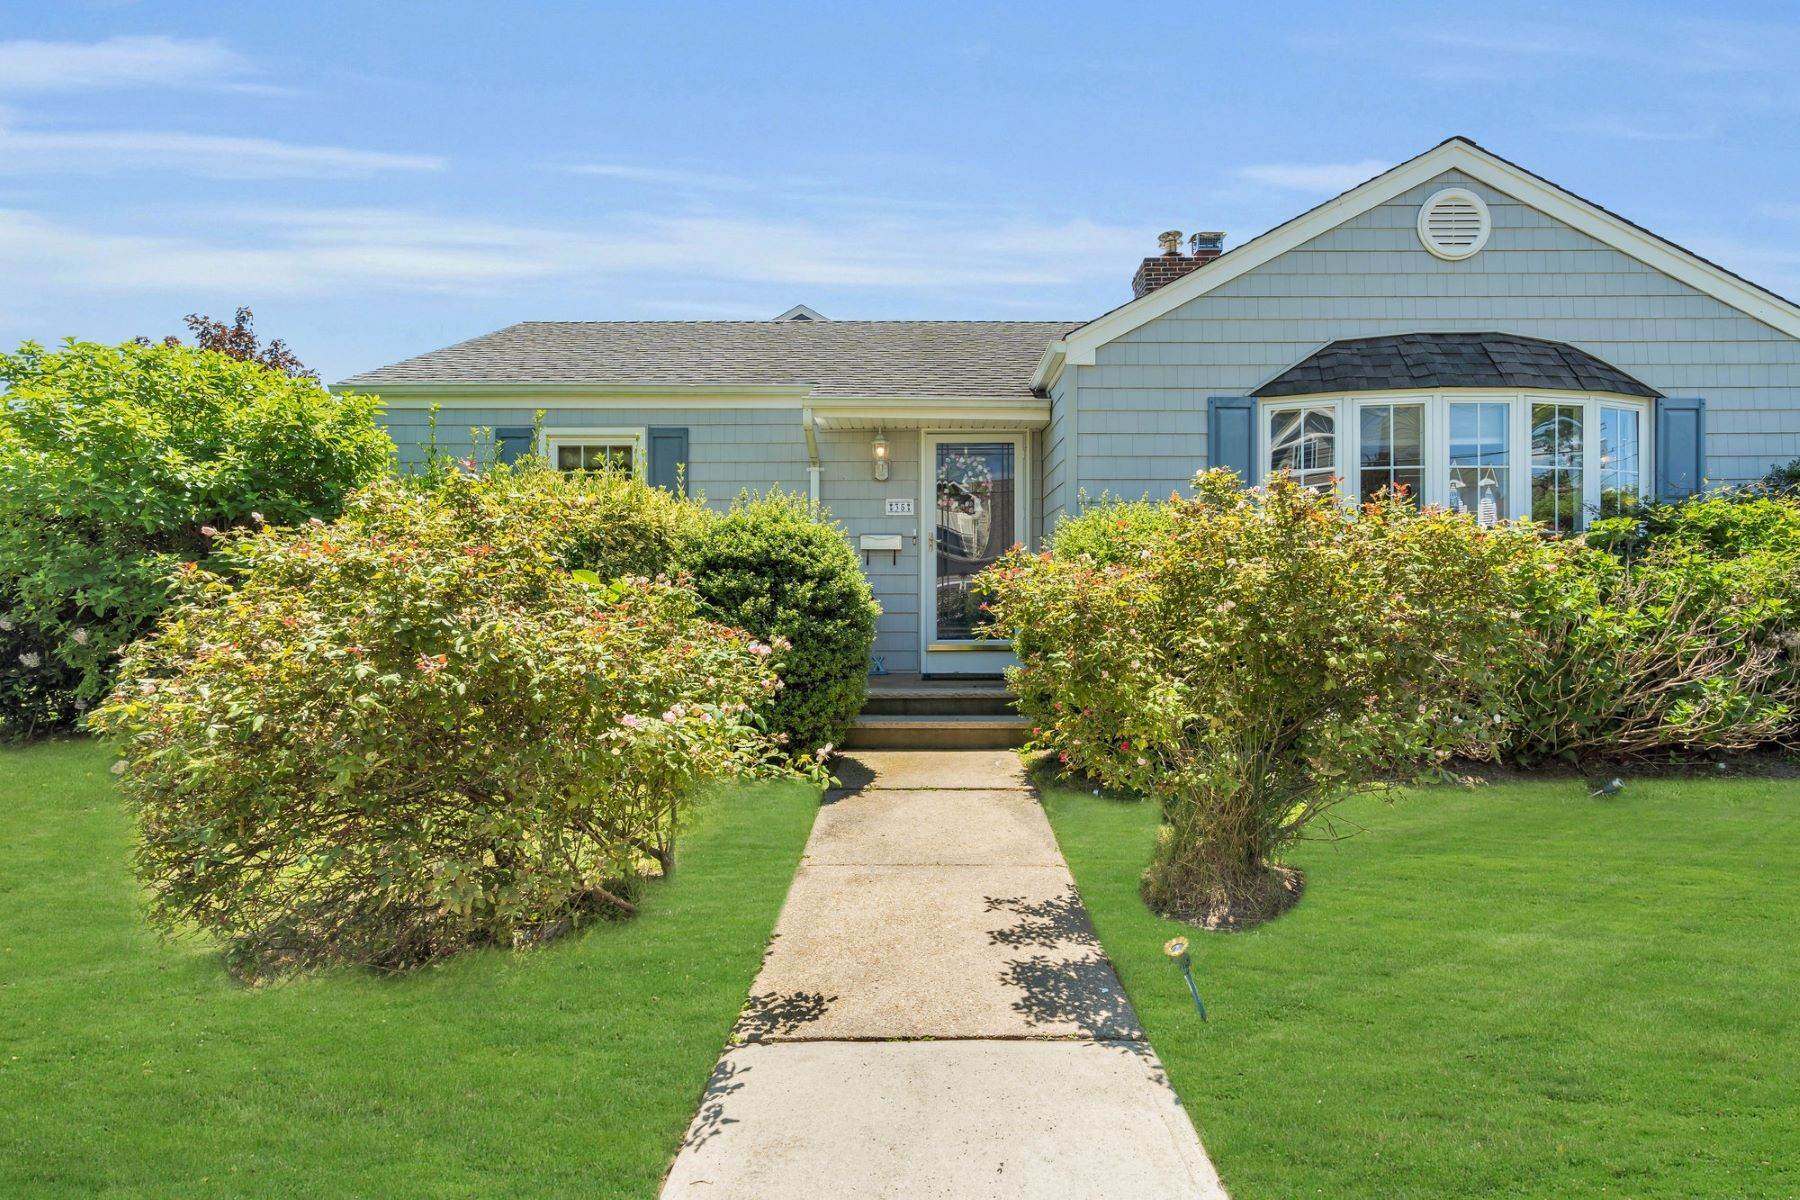 Single Family Homes for Sale at Great Location 35 Woodland Avenue Manasquan, New Jersey 08736 United States